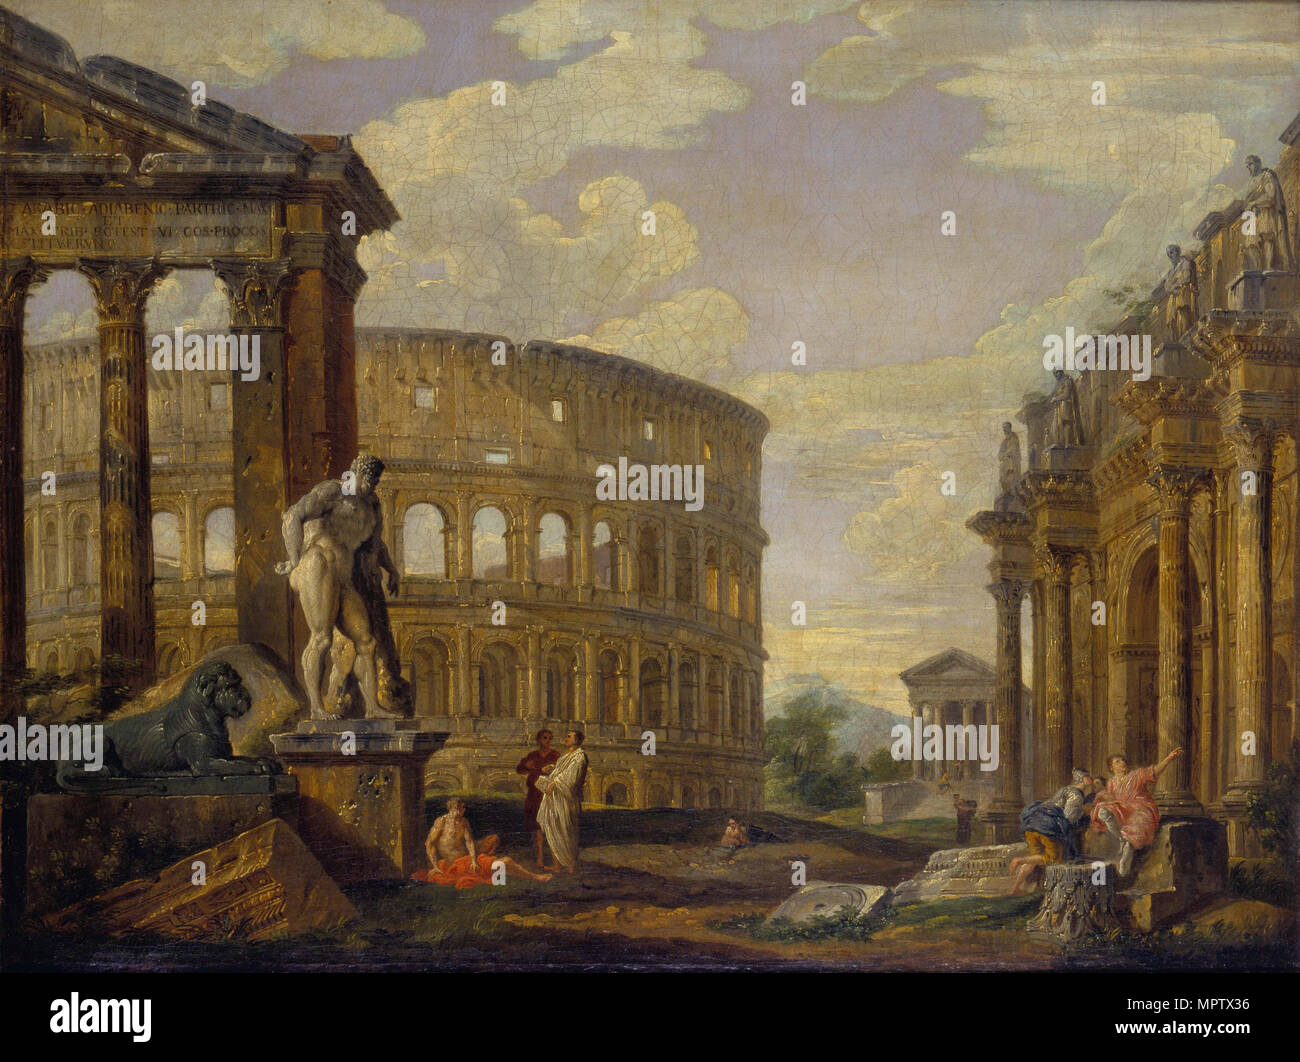 Landscape with Hercules and ruins of ancient Rome. Stock Photo